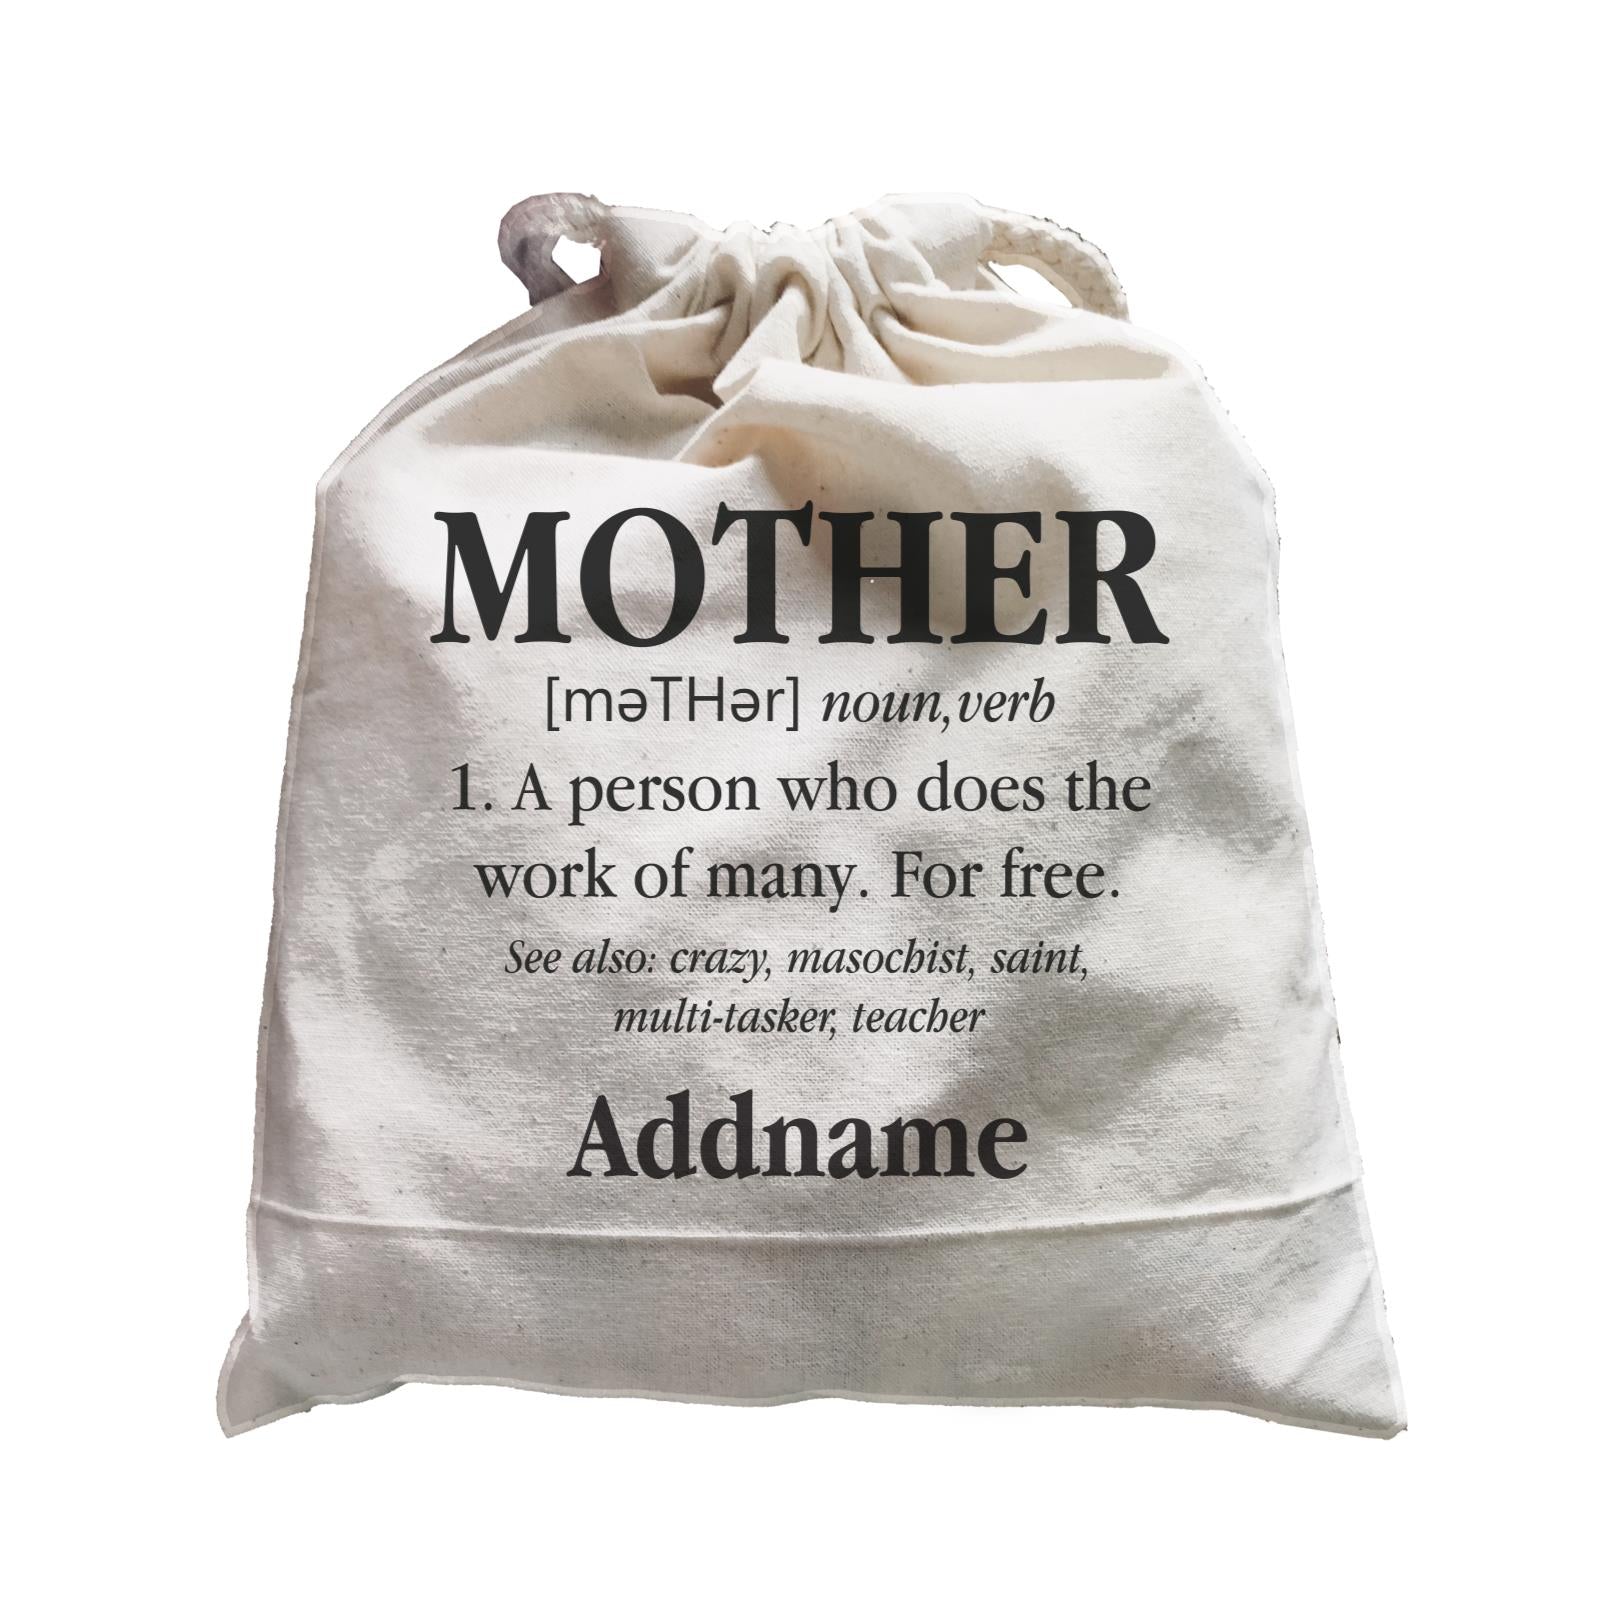 Funny Mom Quotes Mother Meaning A Person Who Does The Work Of Many For Free Addname Satchel